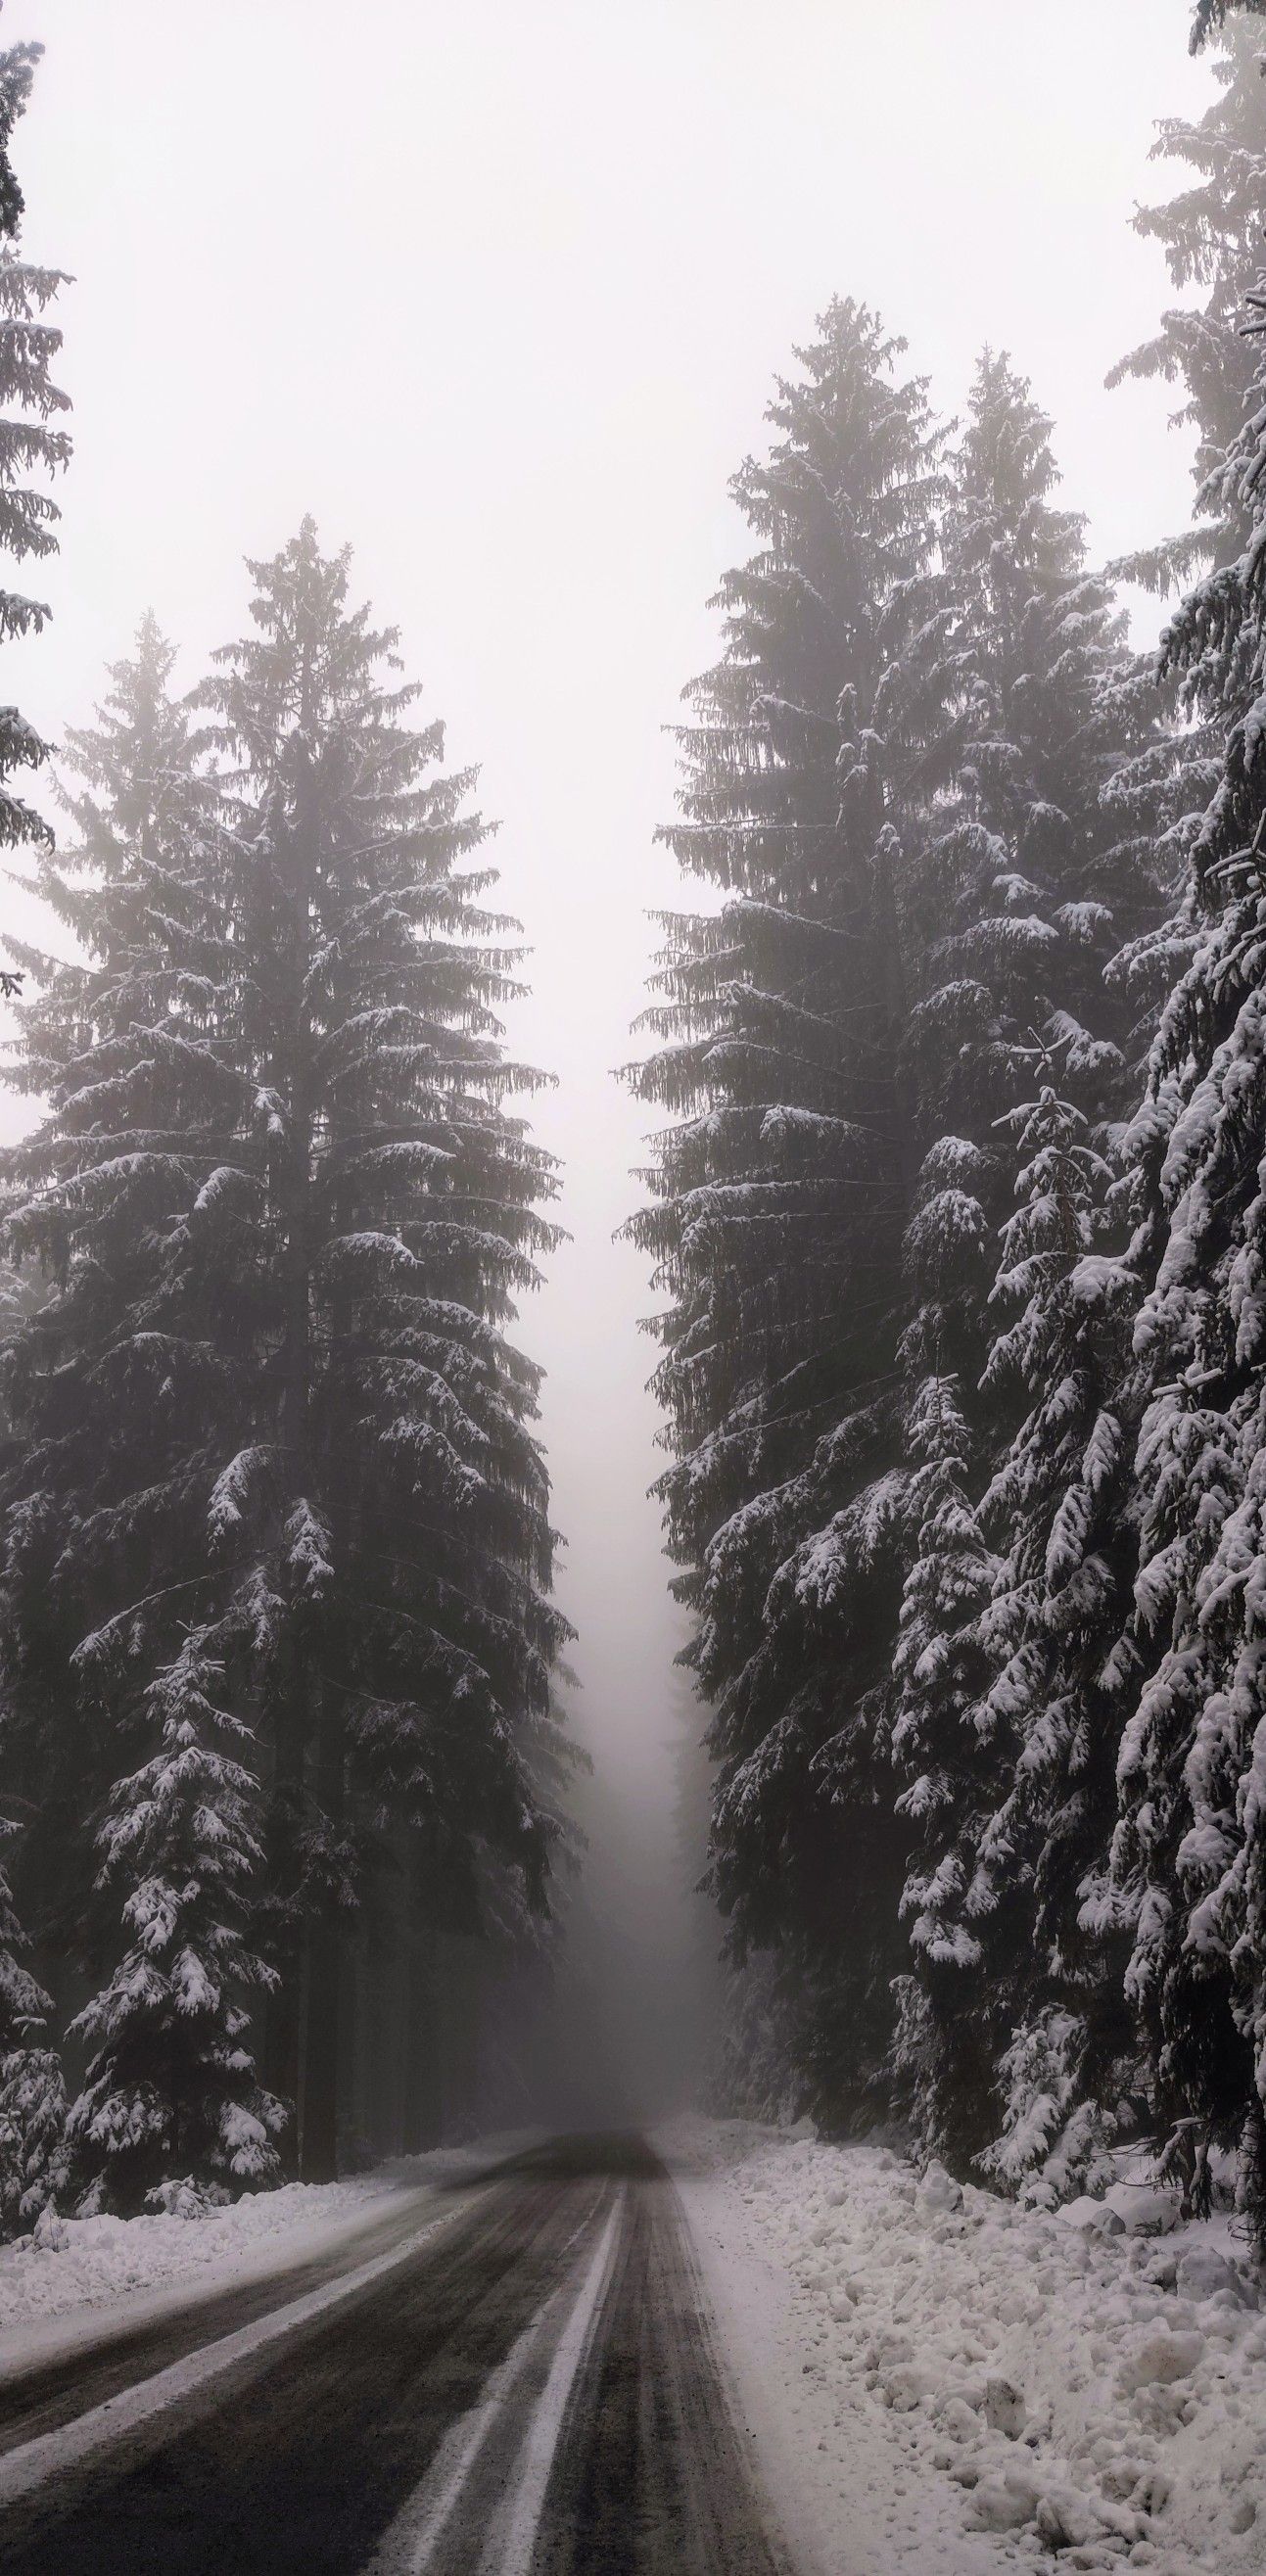 A snowy road surrounded by trees in the fog. - Fog, winter, snow